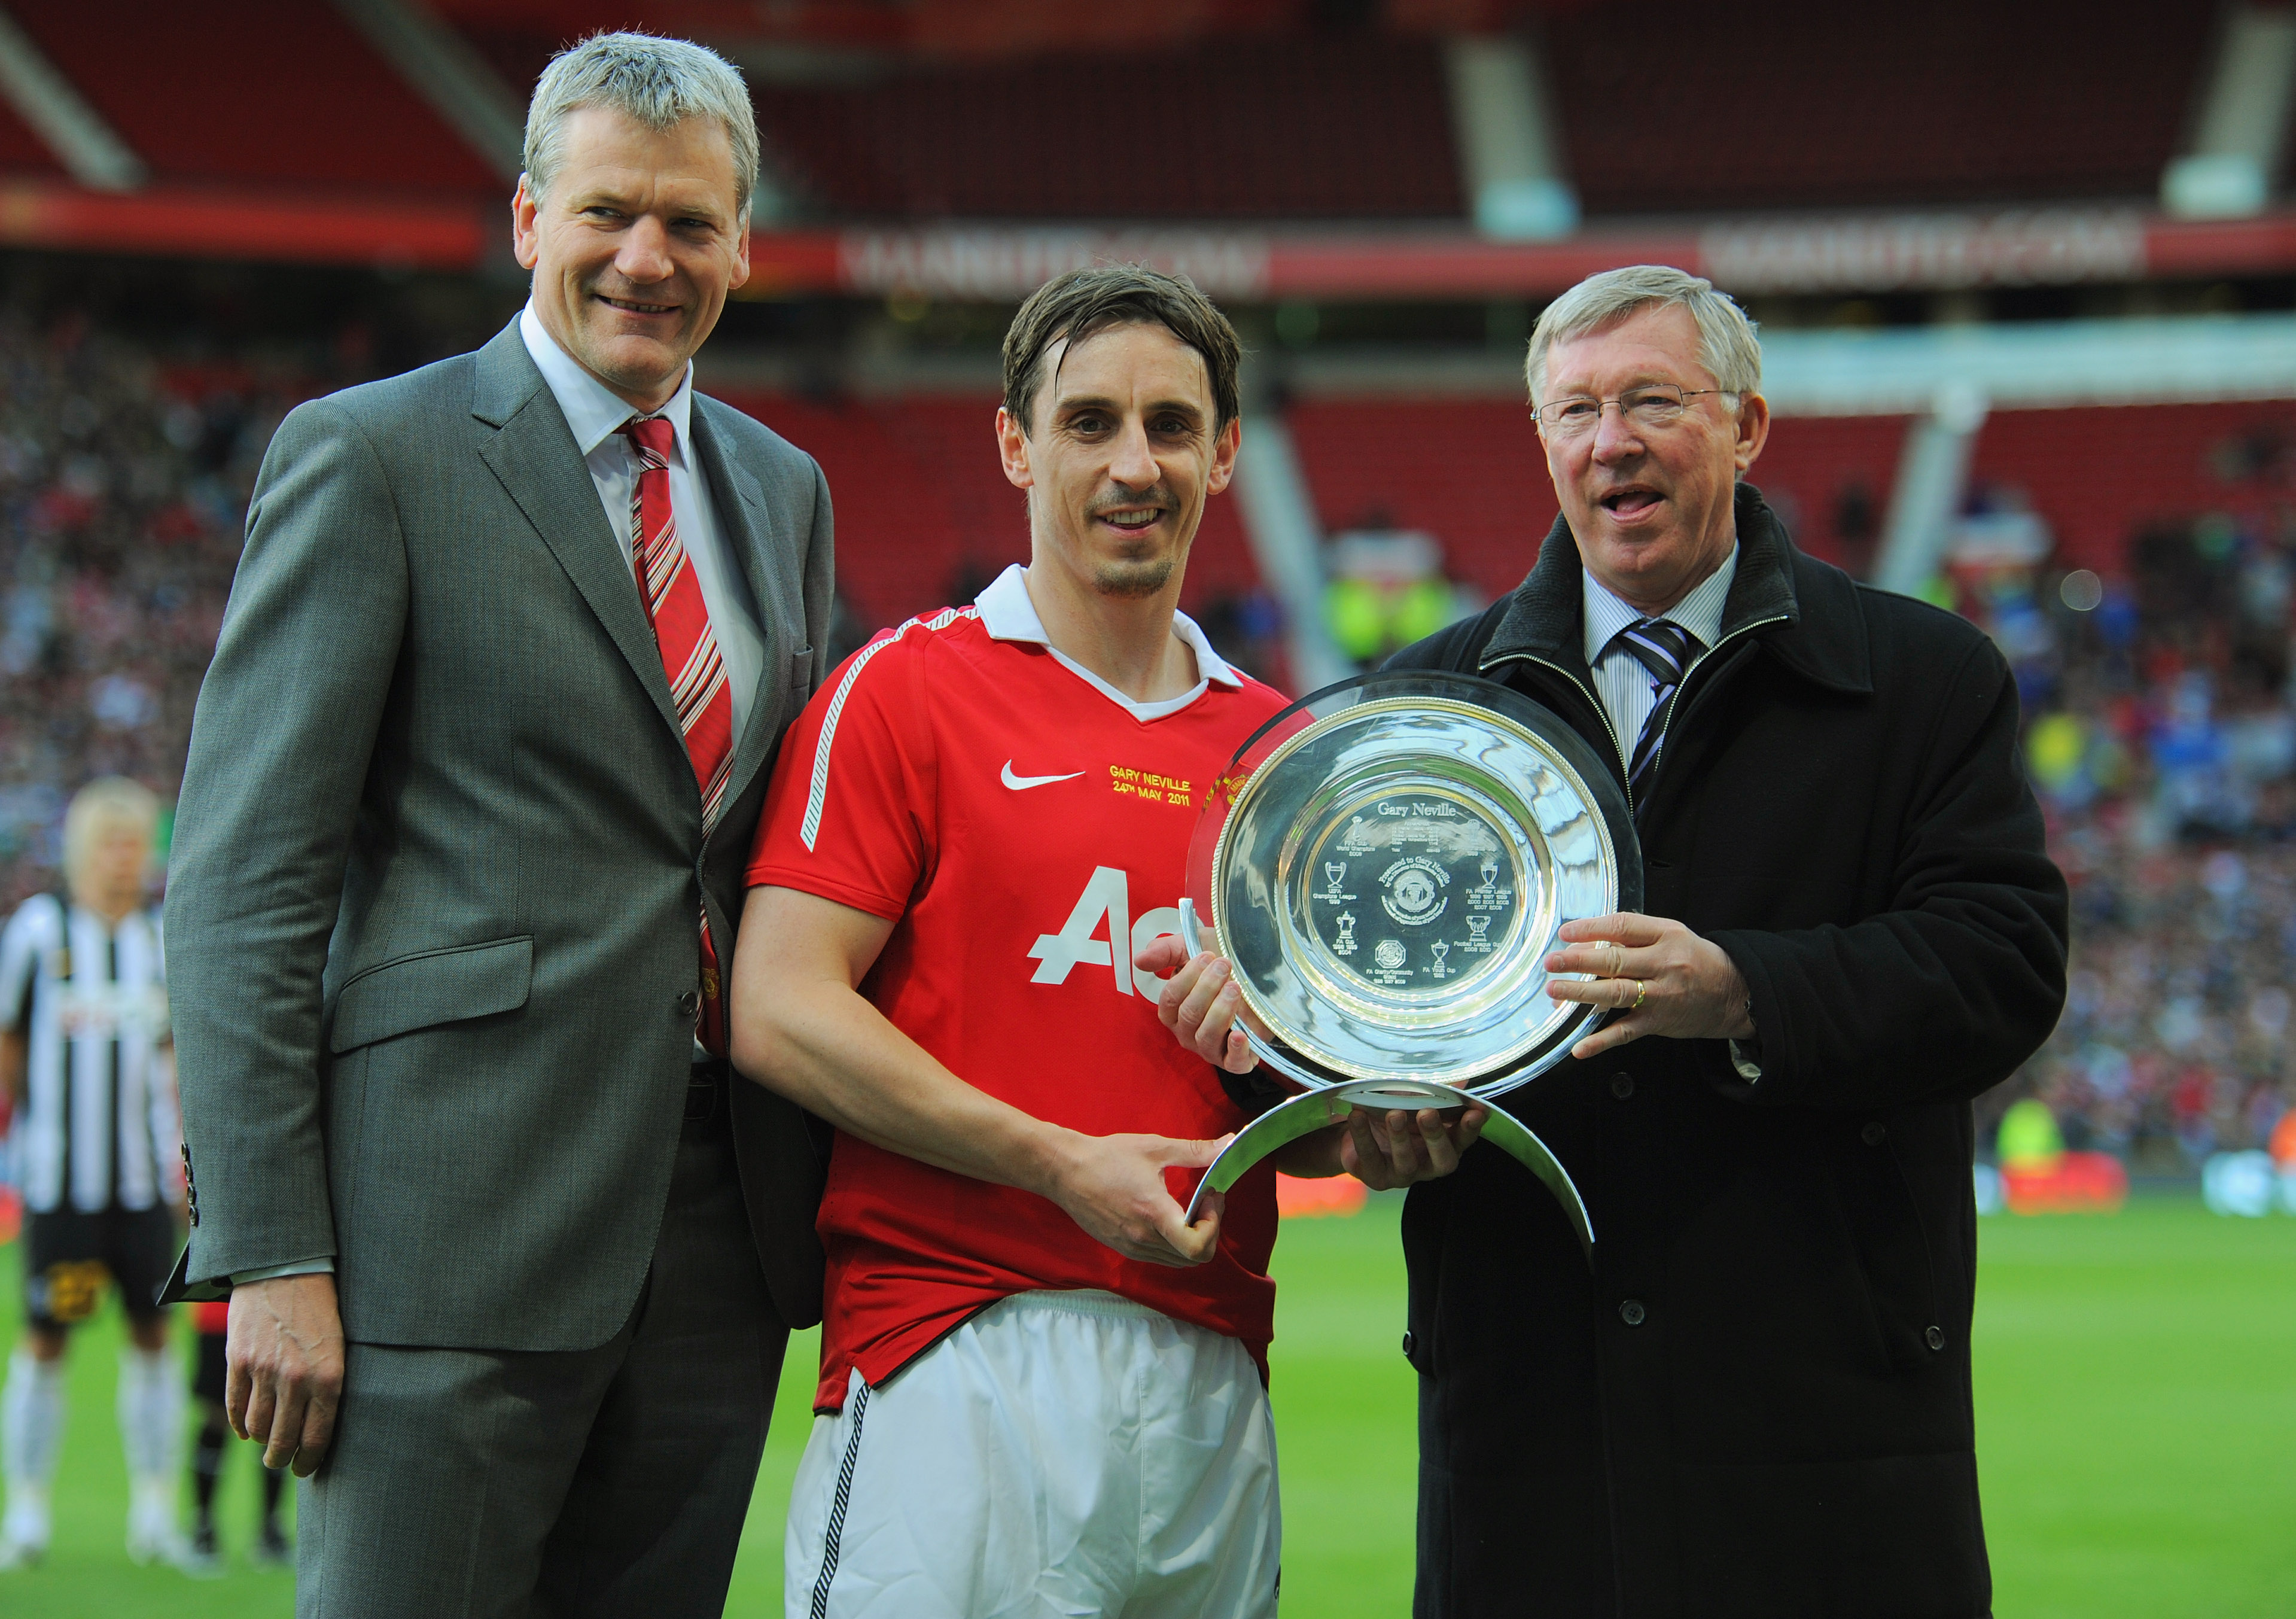 MANCHESTER, ENGLAND - MAY 24: Manchester United Chief Executive David Gill and manager Sir Alex Ferguson present Gary Neville with a plate during the Gary Neville Testimonial Match between Manchester United and Juventus at Old Trafford on May 24, 2011 in